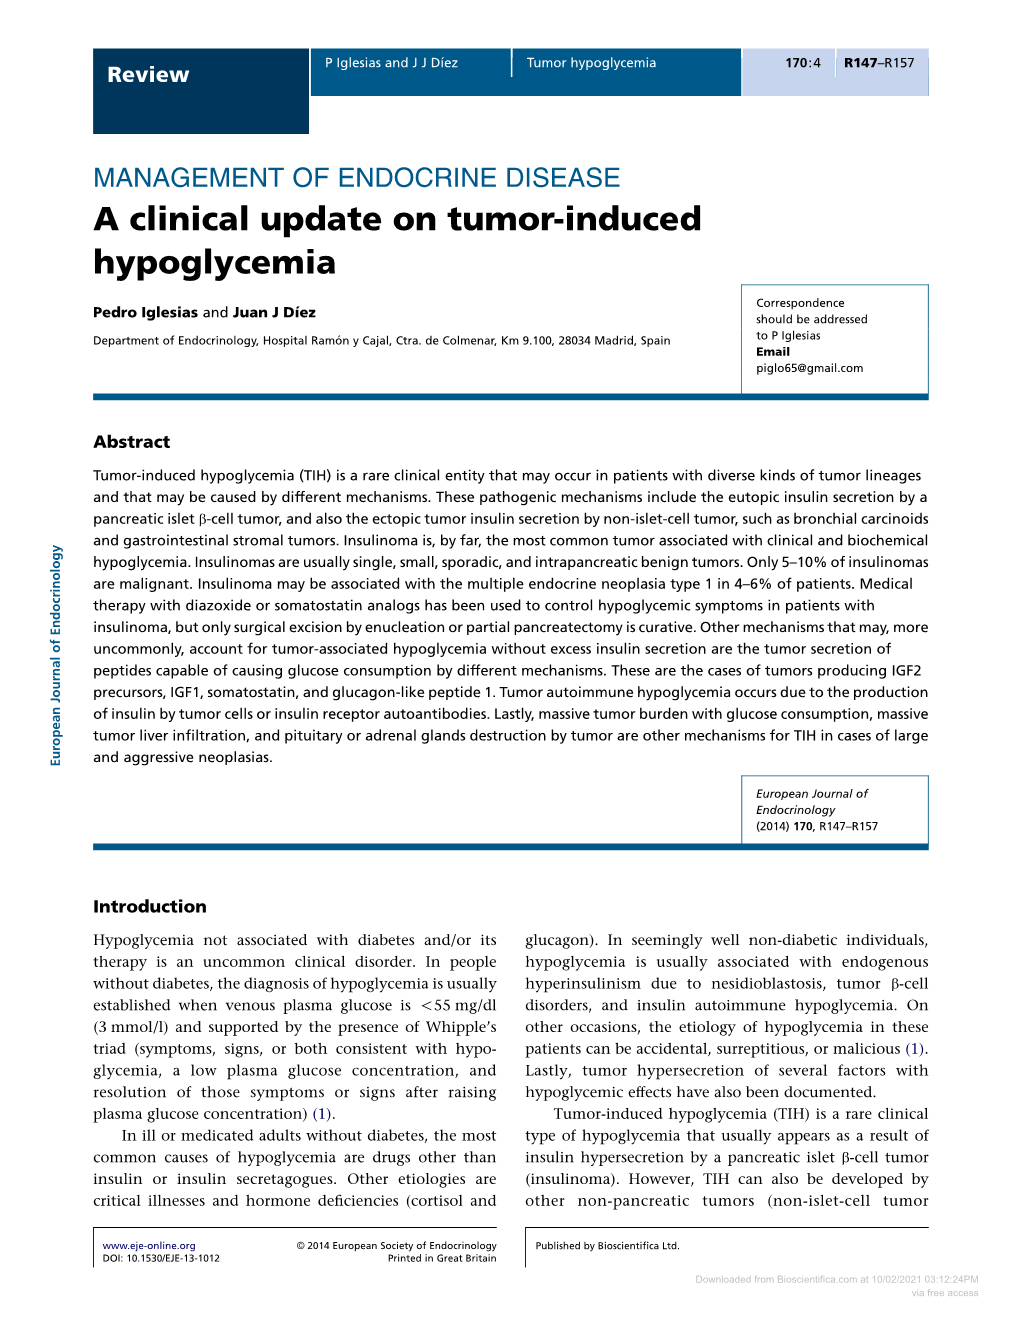 A Clinical Update on Tumor-Induced Hypoglycemia